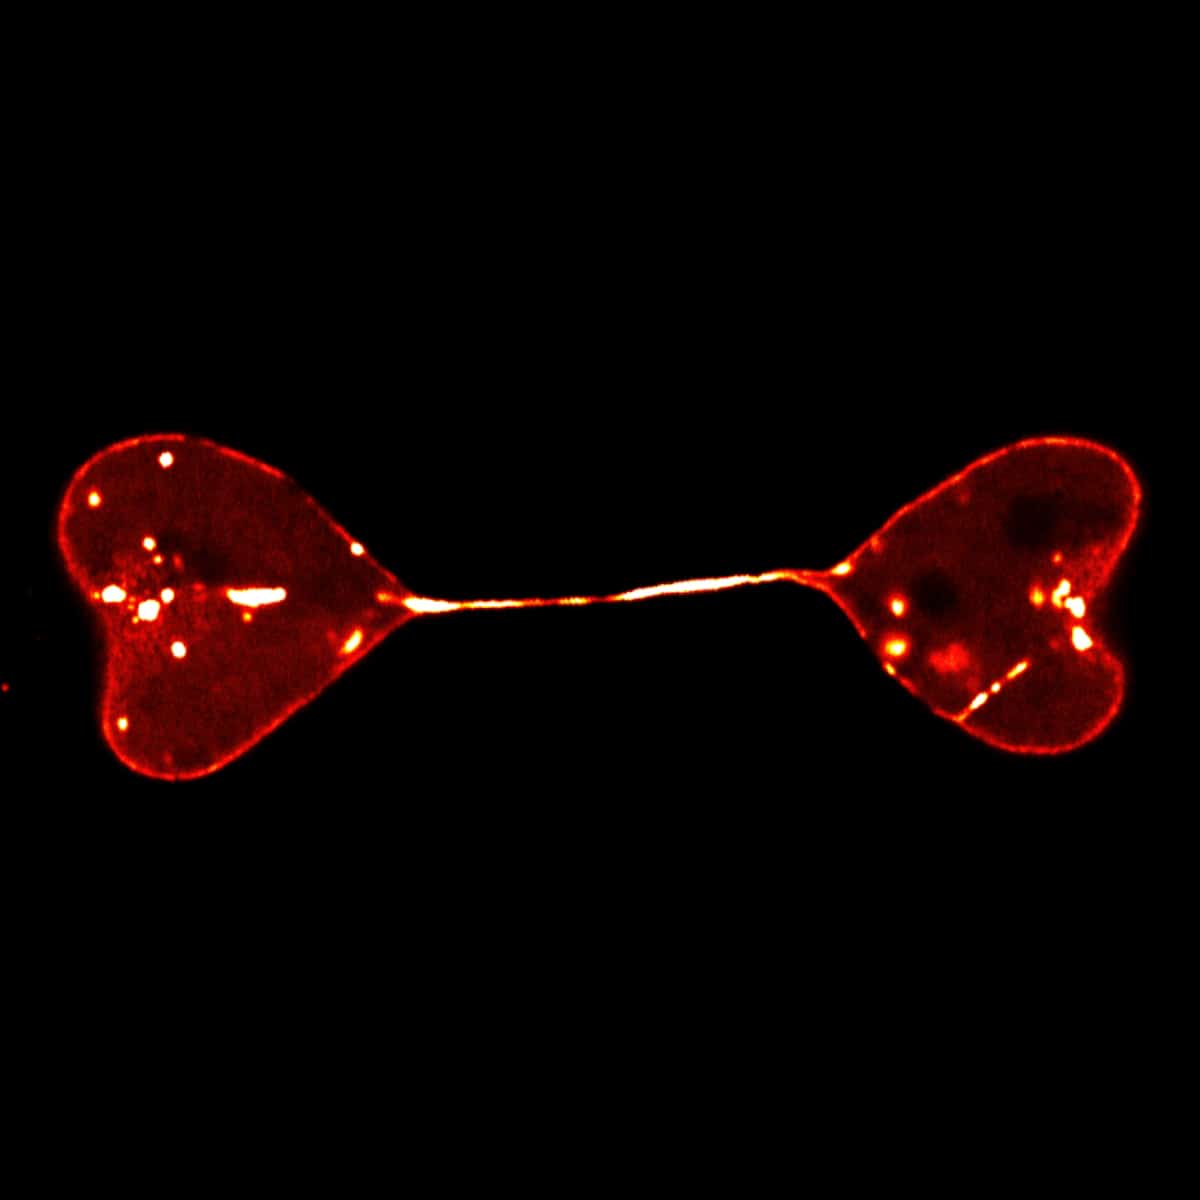 Semi-separated nuclei of two cells form a heart-to-heart shape